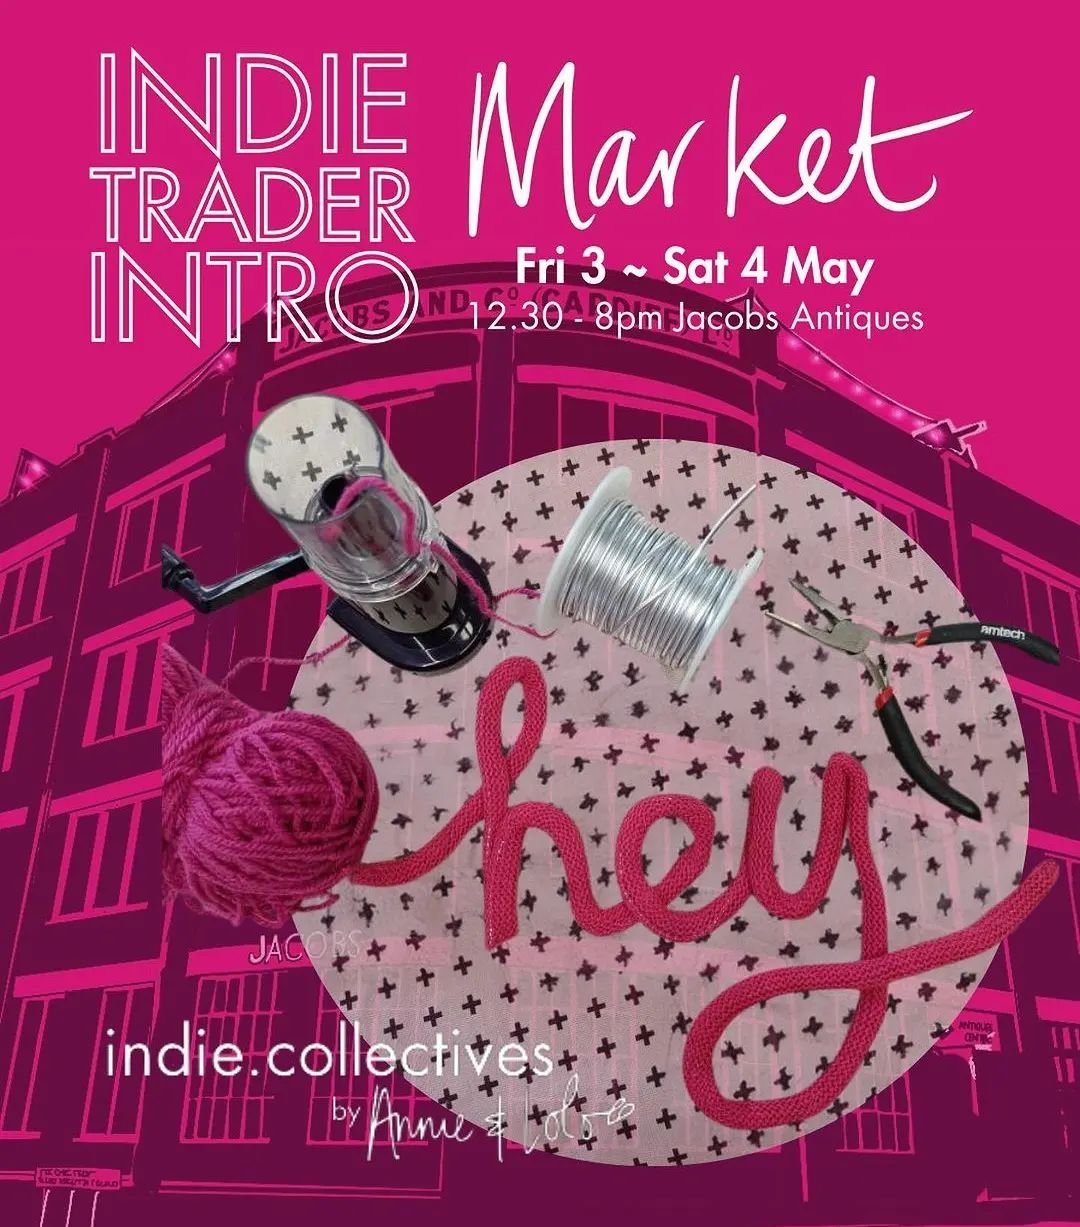 the @indie.collectives market at @jacobsmarketcardiff starts tomorrow at 12.30pm

I'll be popping in for a coffee, lunch and to check out the stalls tomorrow with my nephew Billy and I will then be setting up my craft stall ready for all day crafting